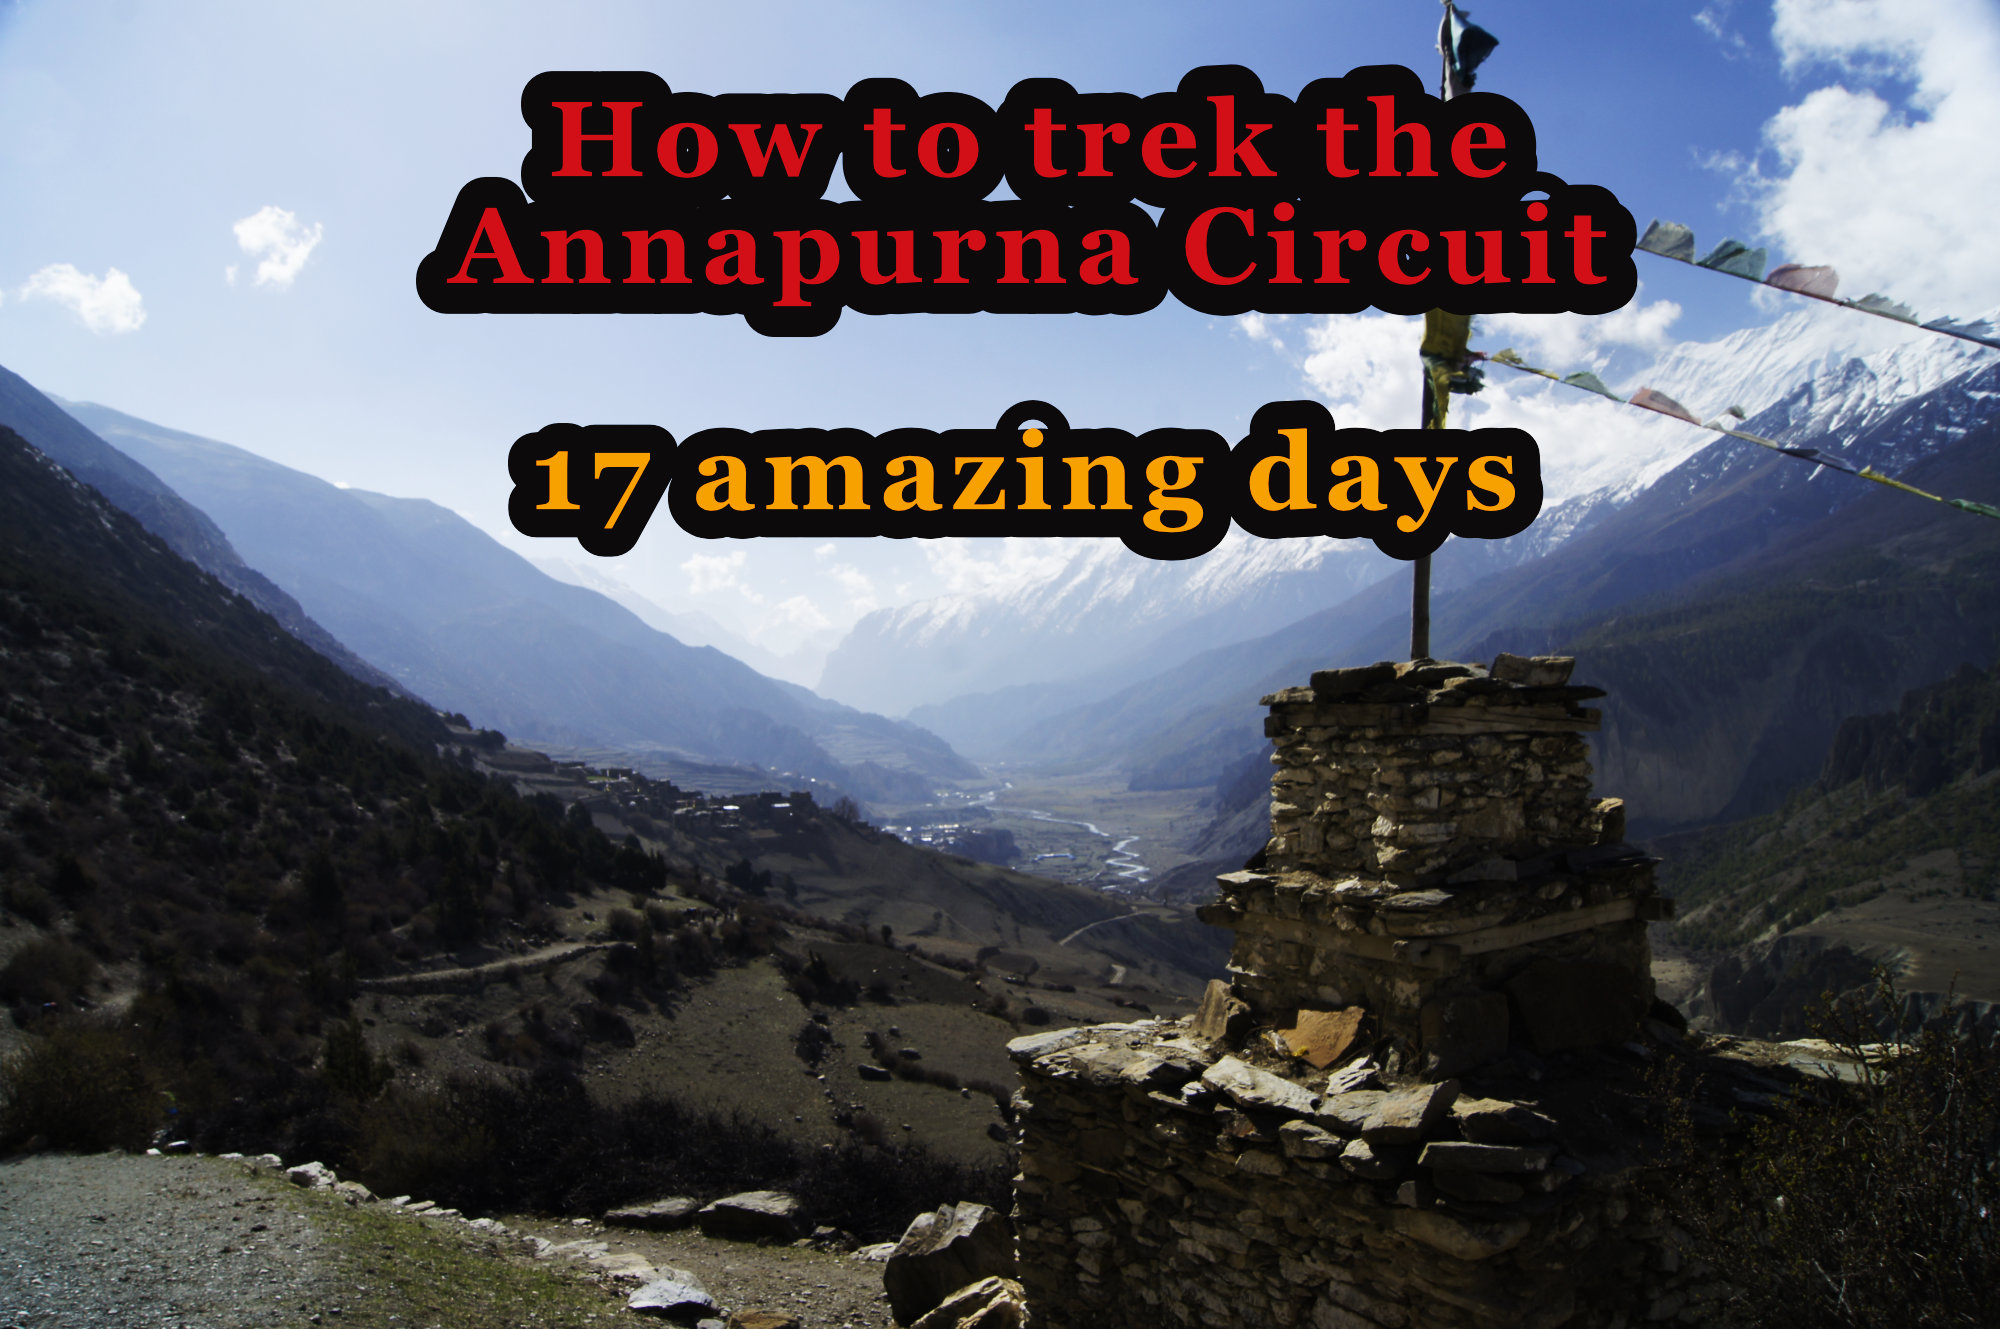 Shows part of the Annapurna Circuit